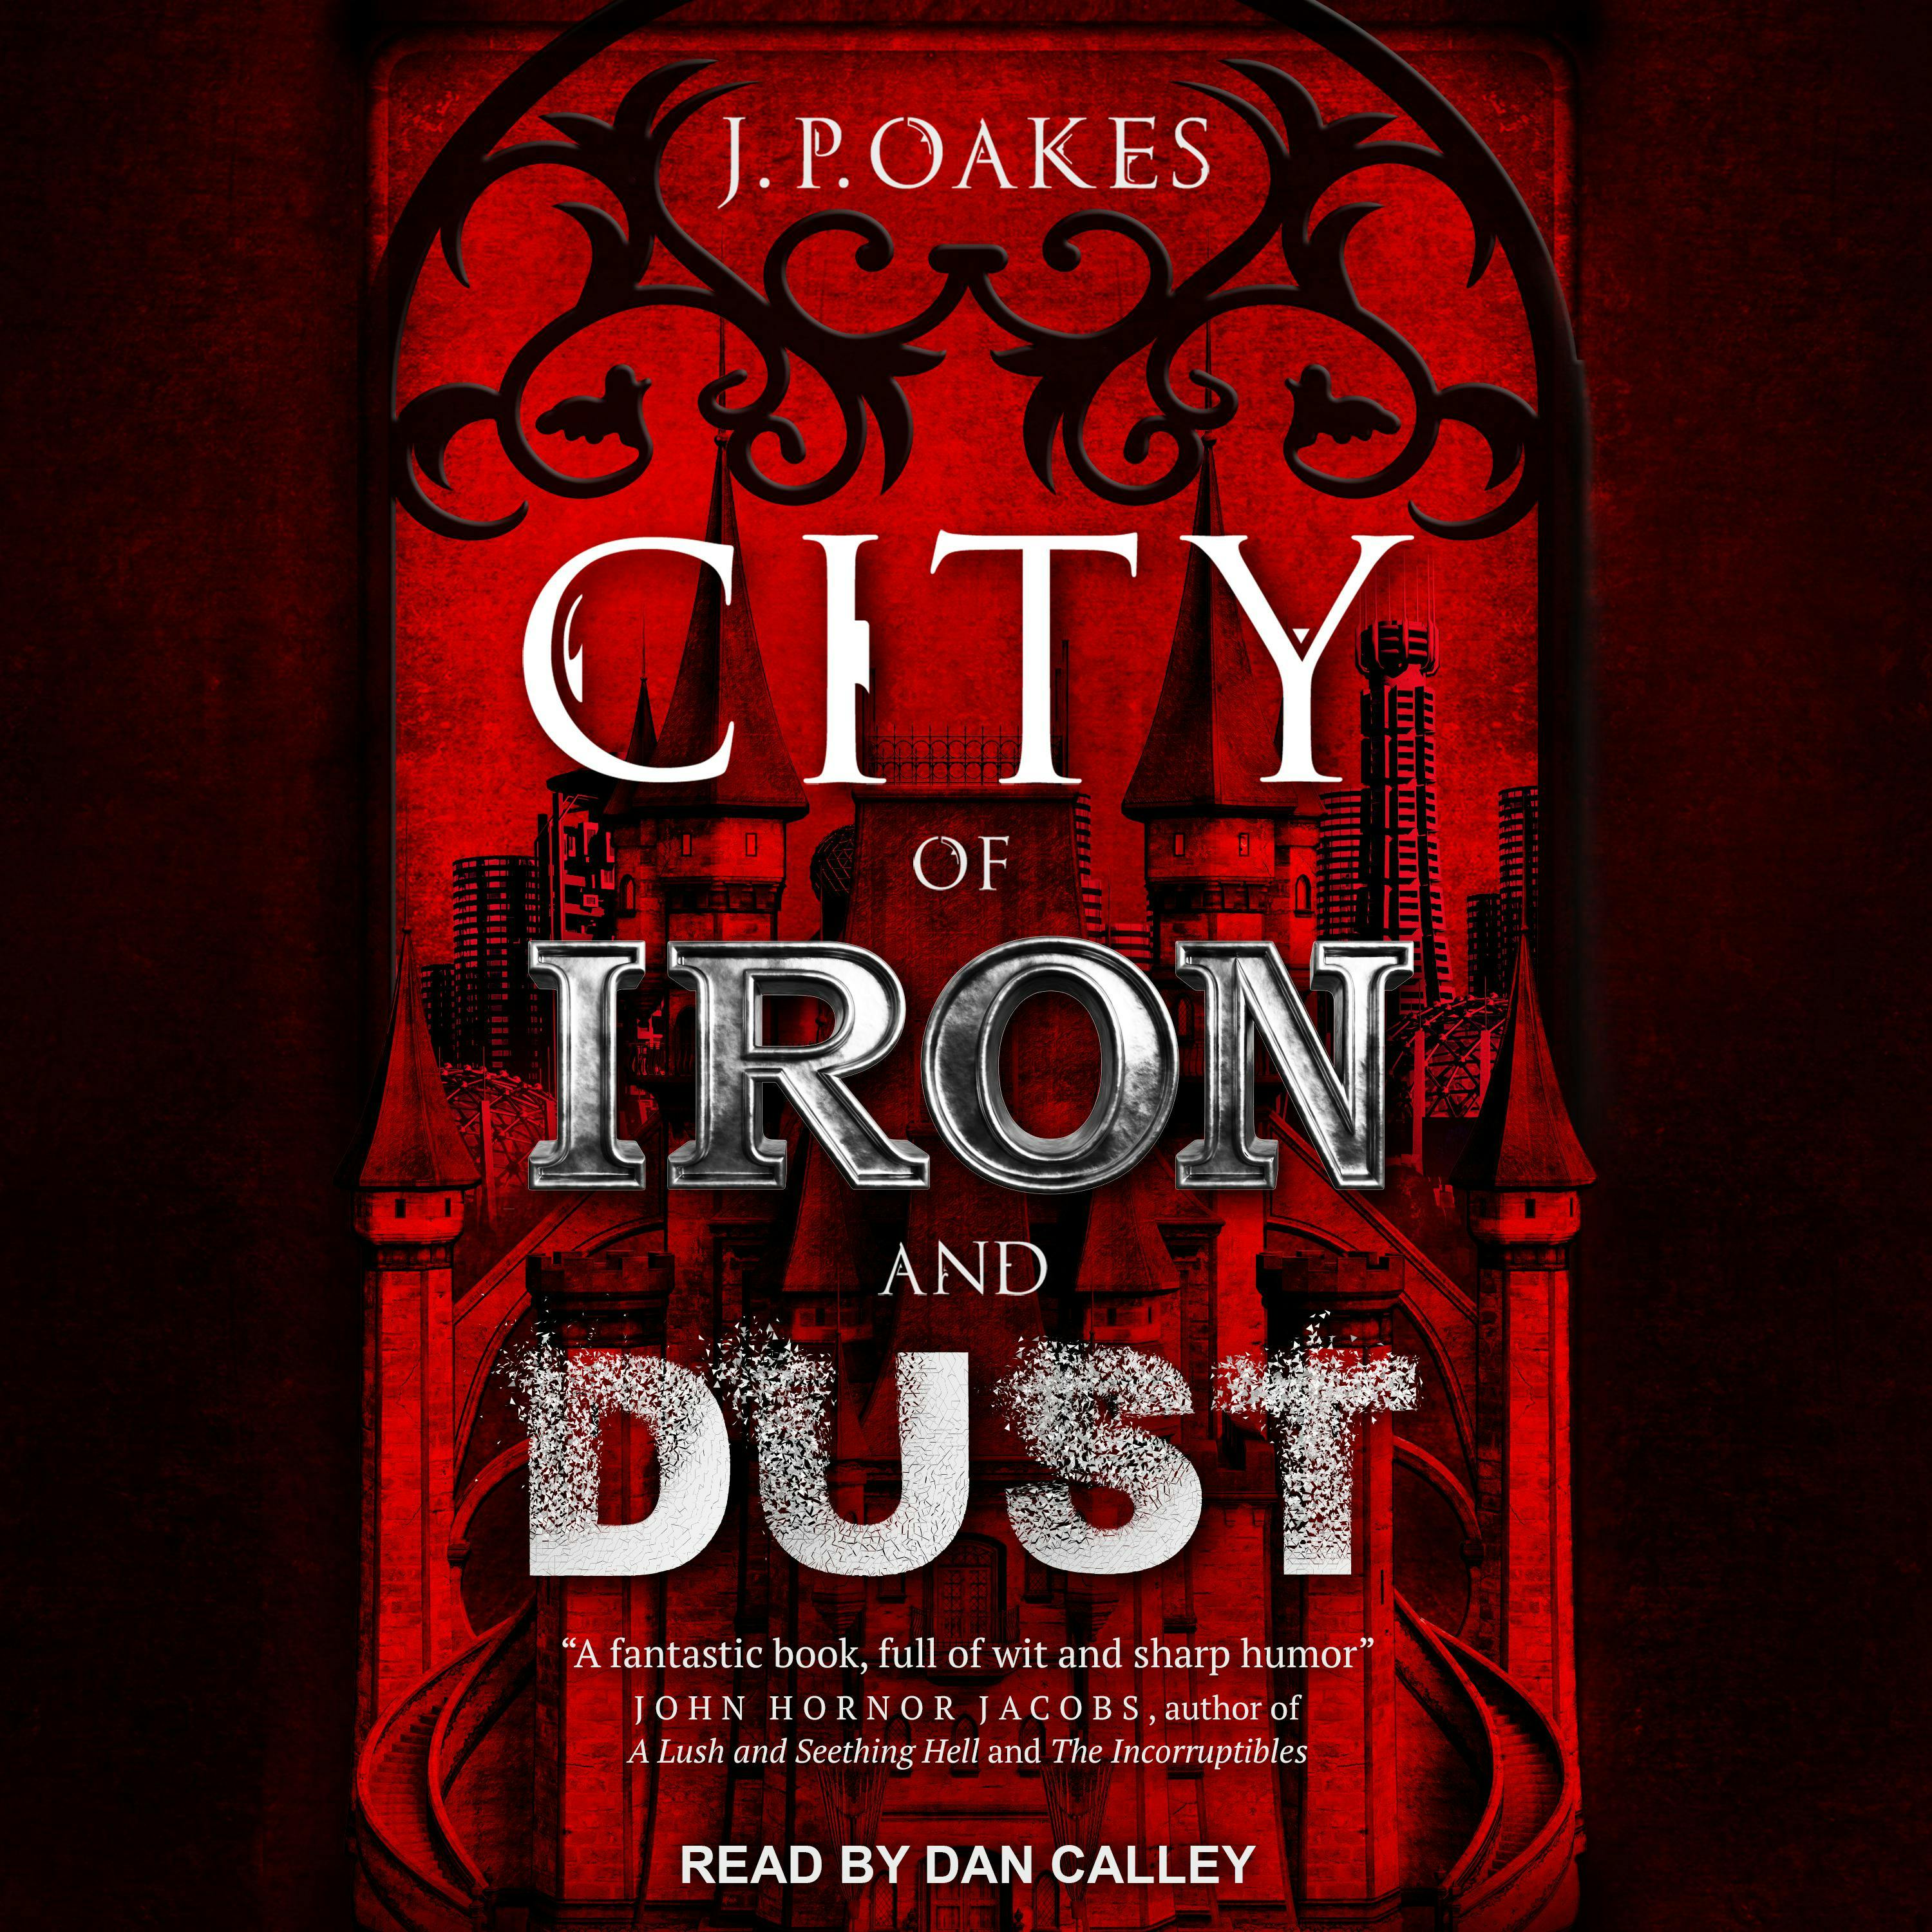 City of Iron and Dust - J.P. Oakes